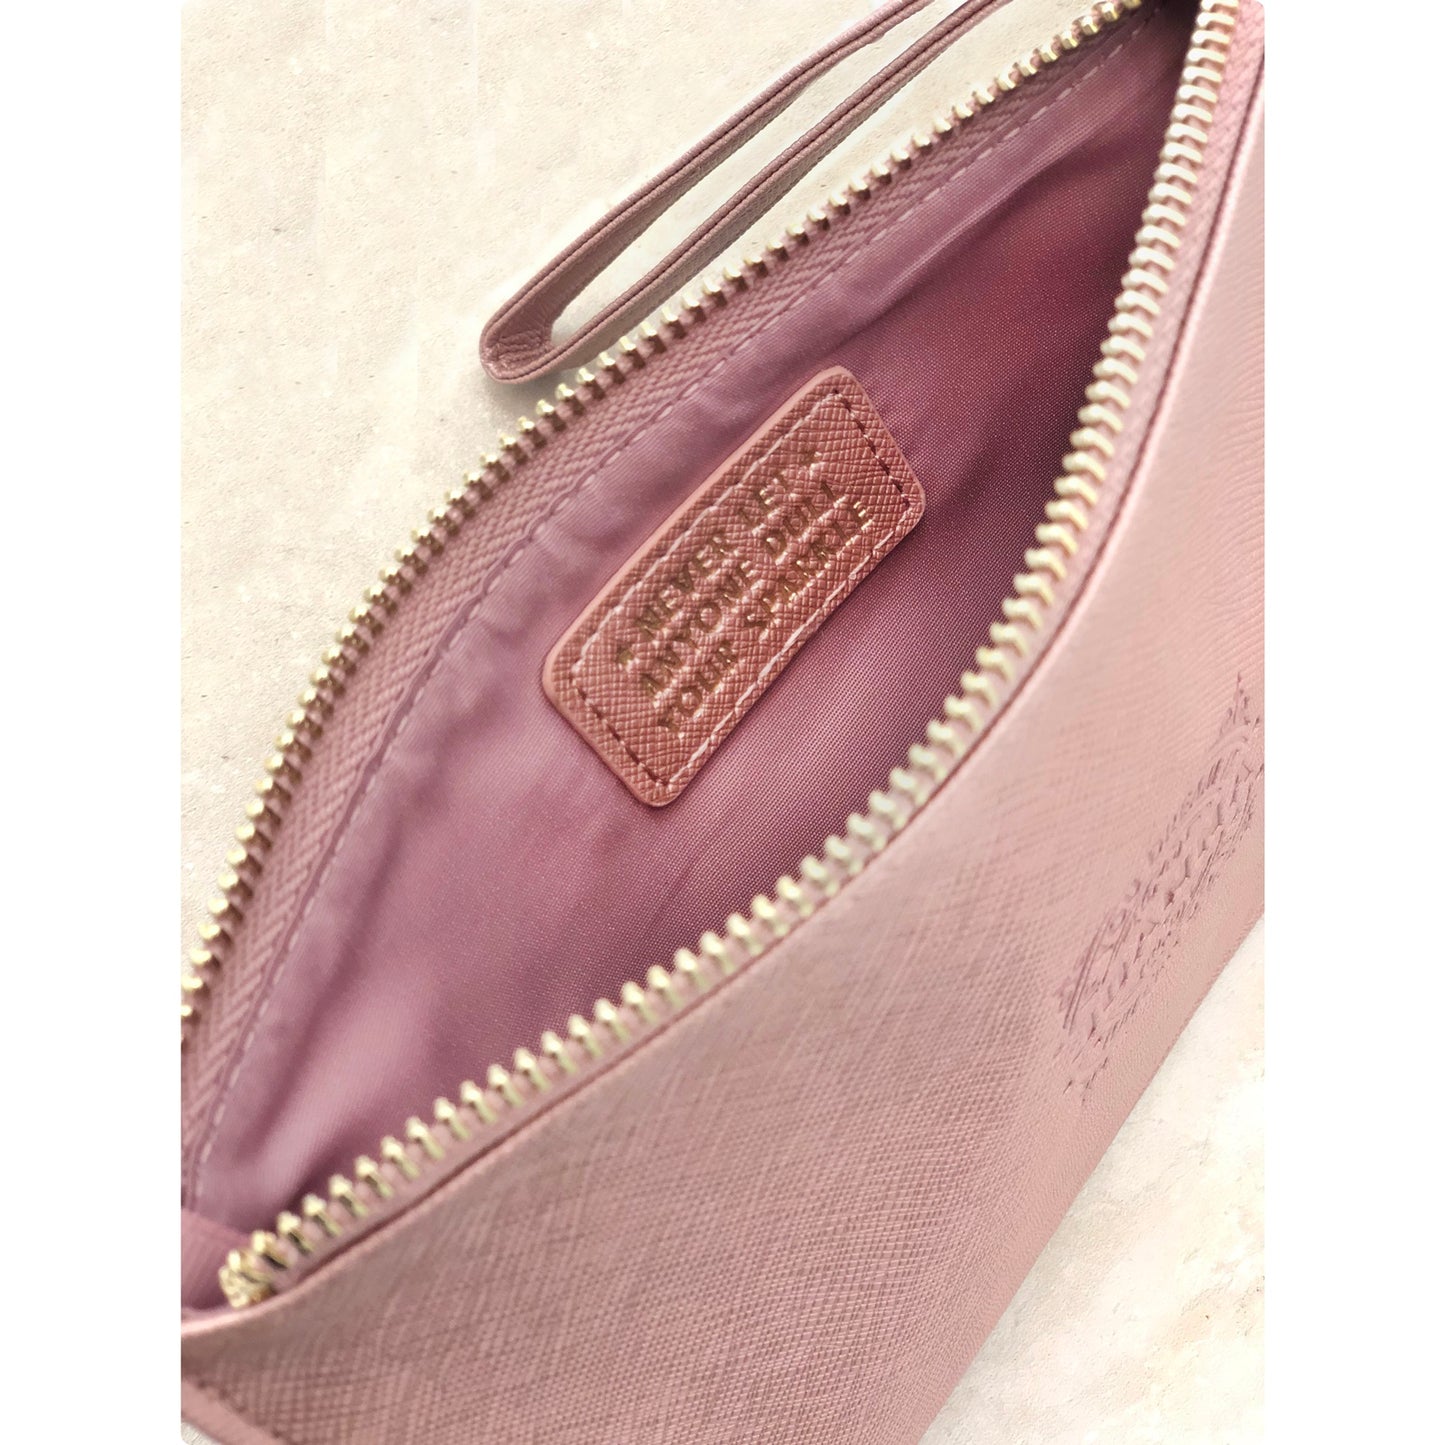 Clutch Bag With Handle & Embossed Text "Debbie"